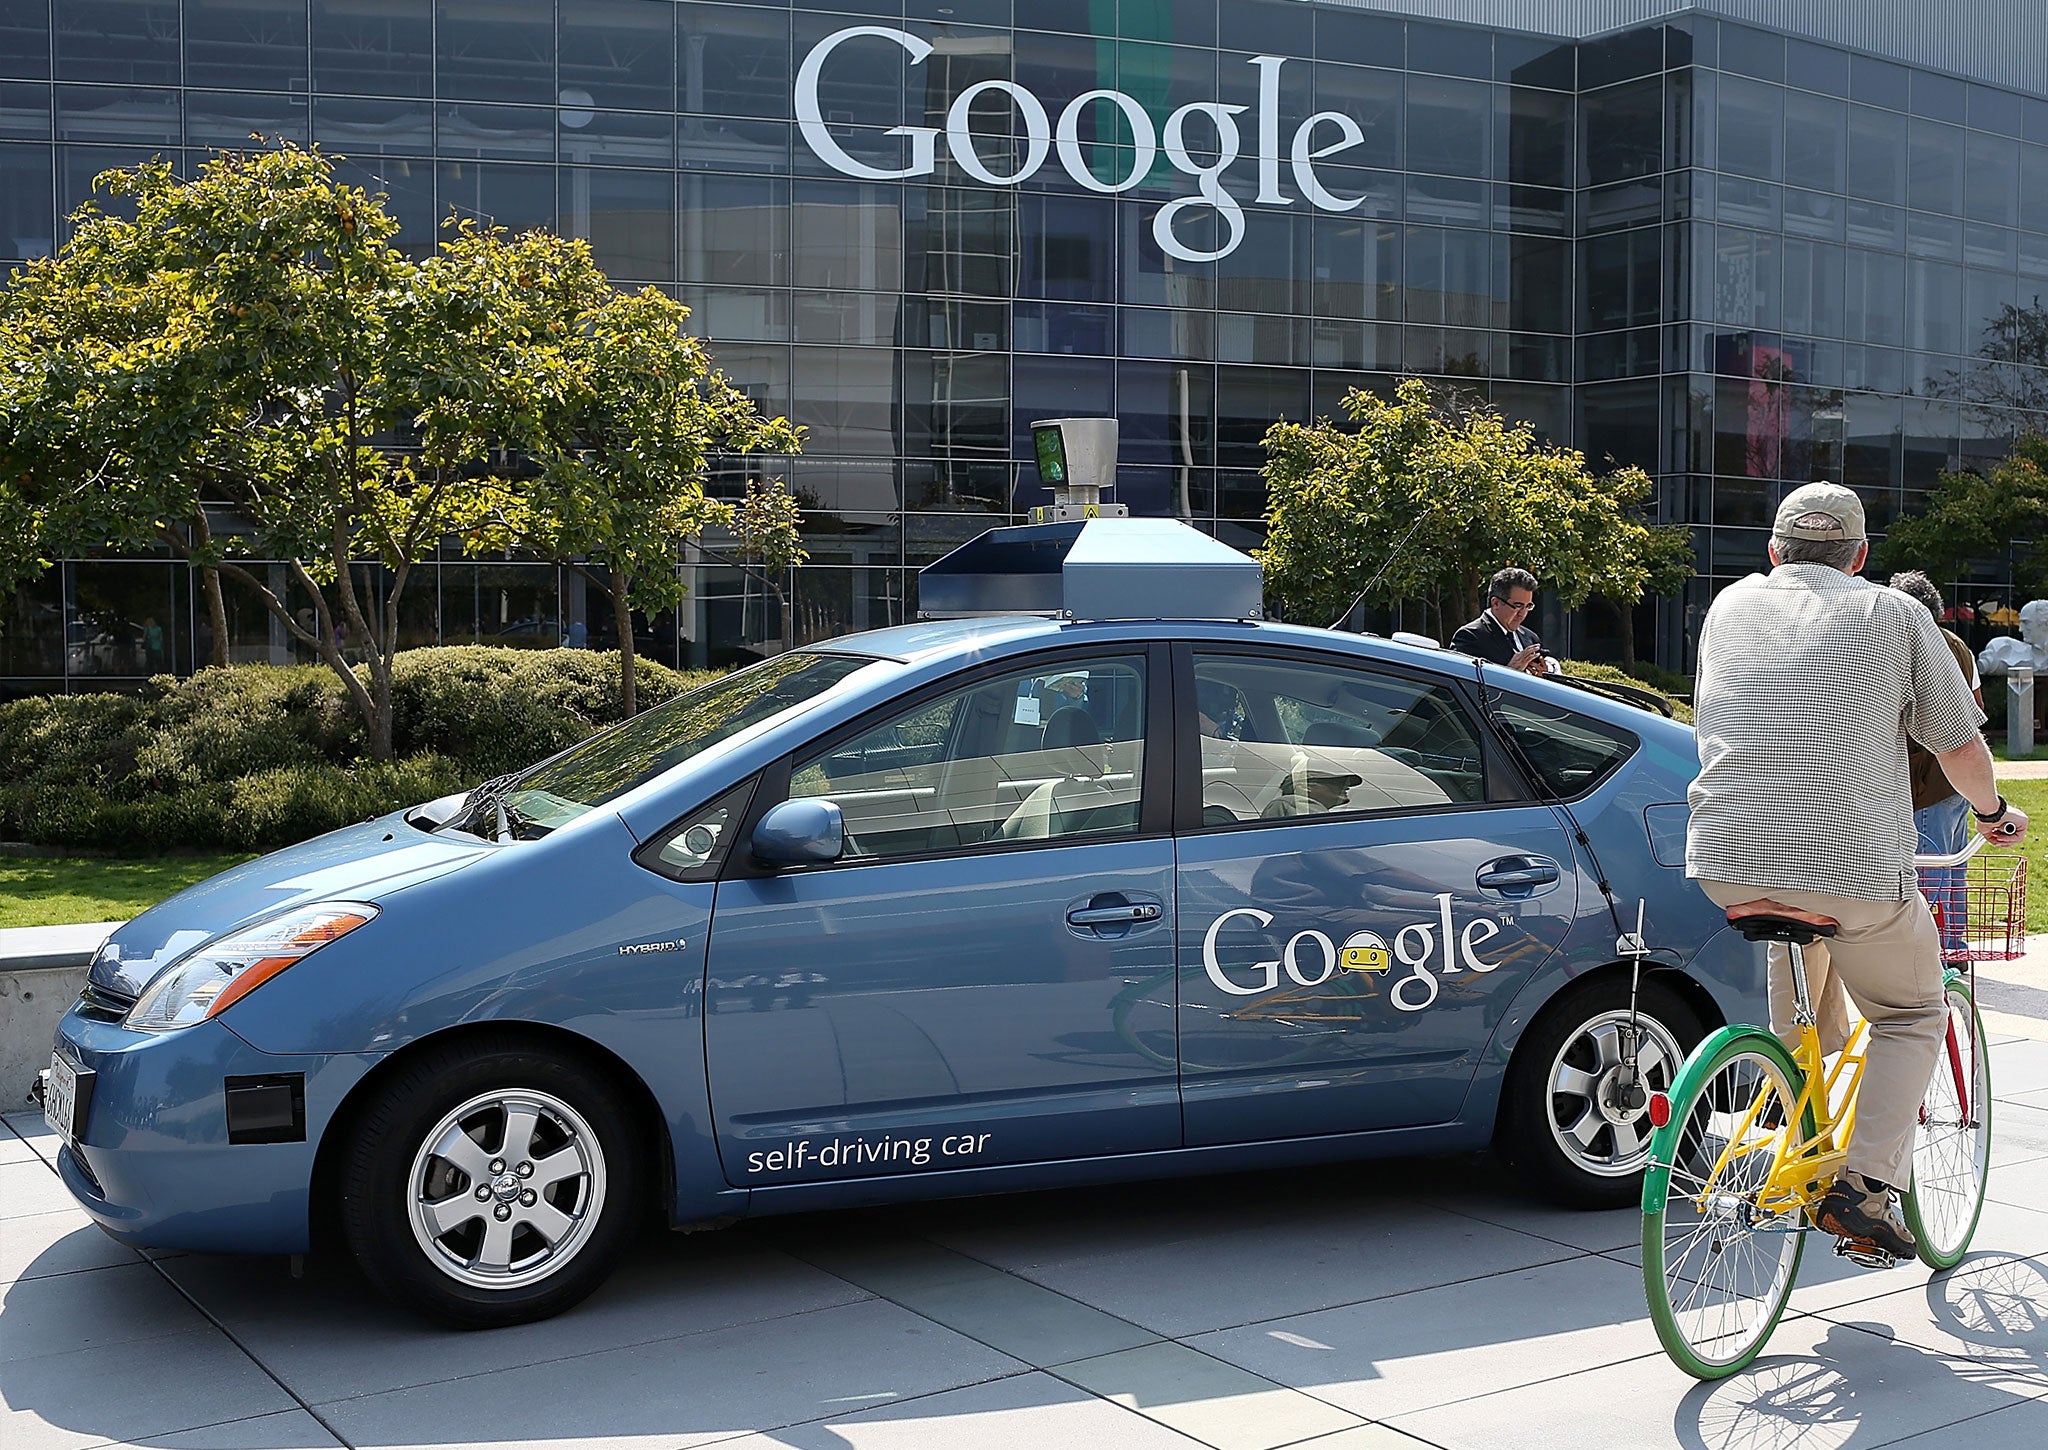 A cyclist rides by a Google self-driving car at the Google headquarters